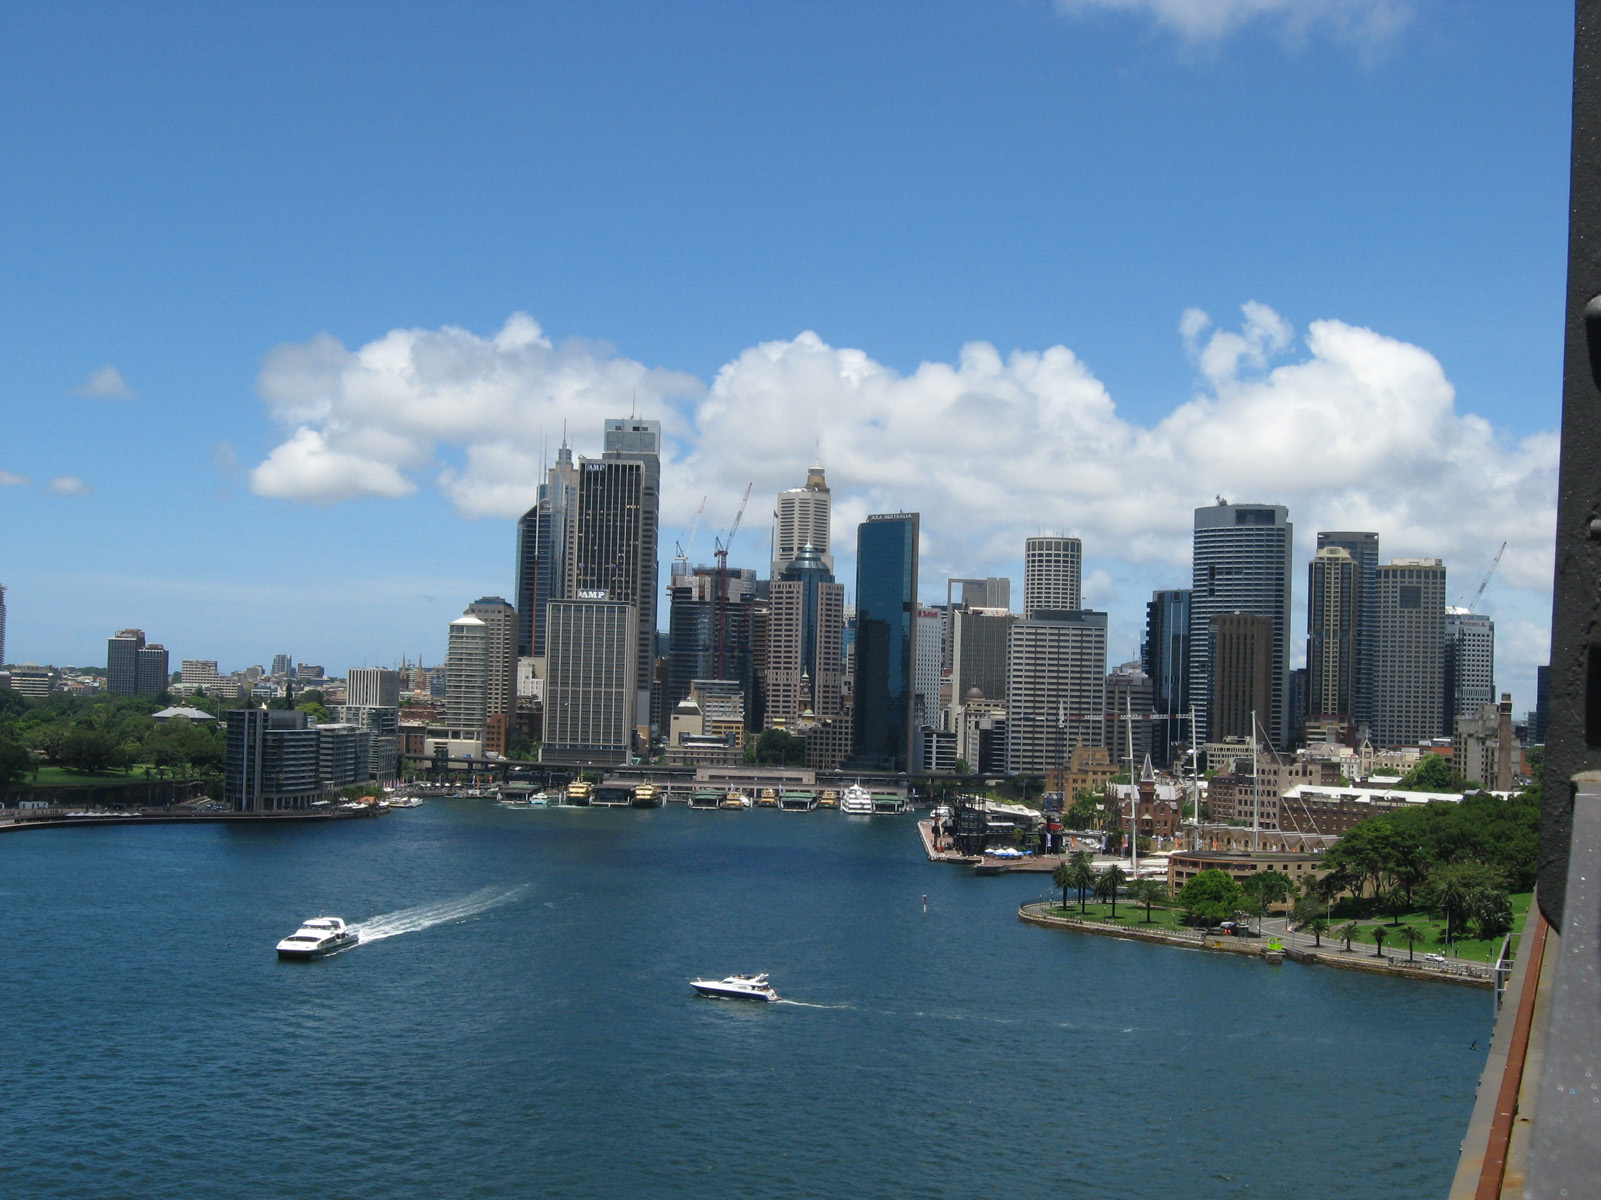 Sydney Cove and the business district in the background..